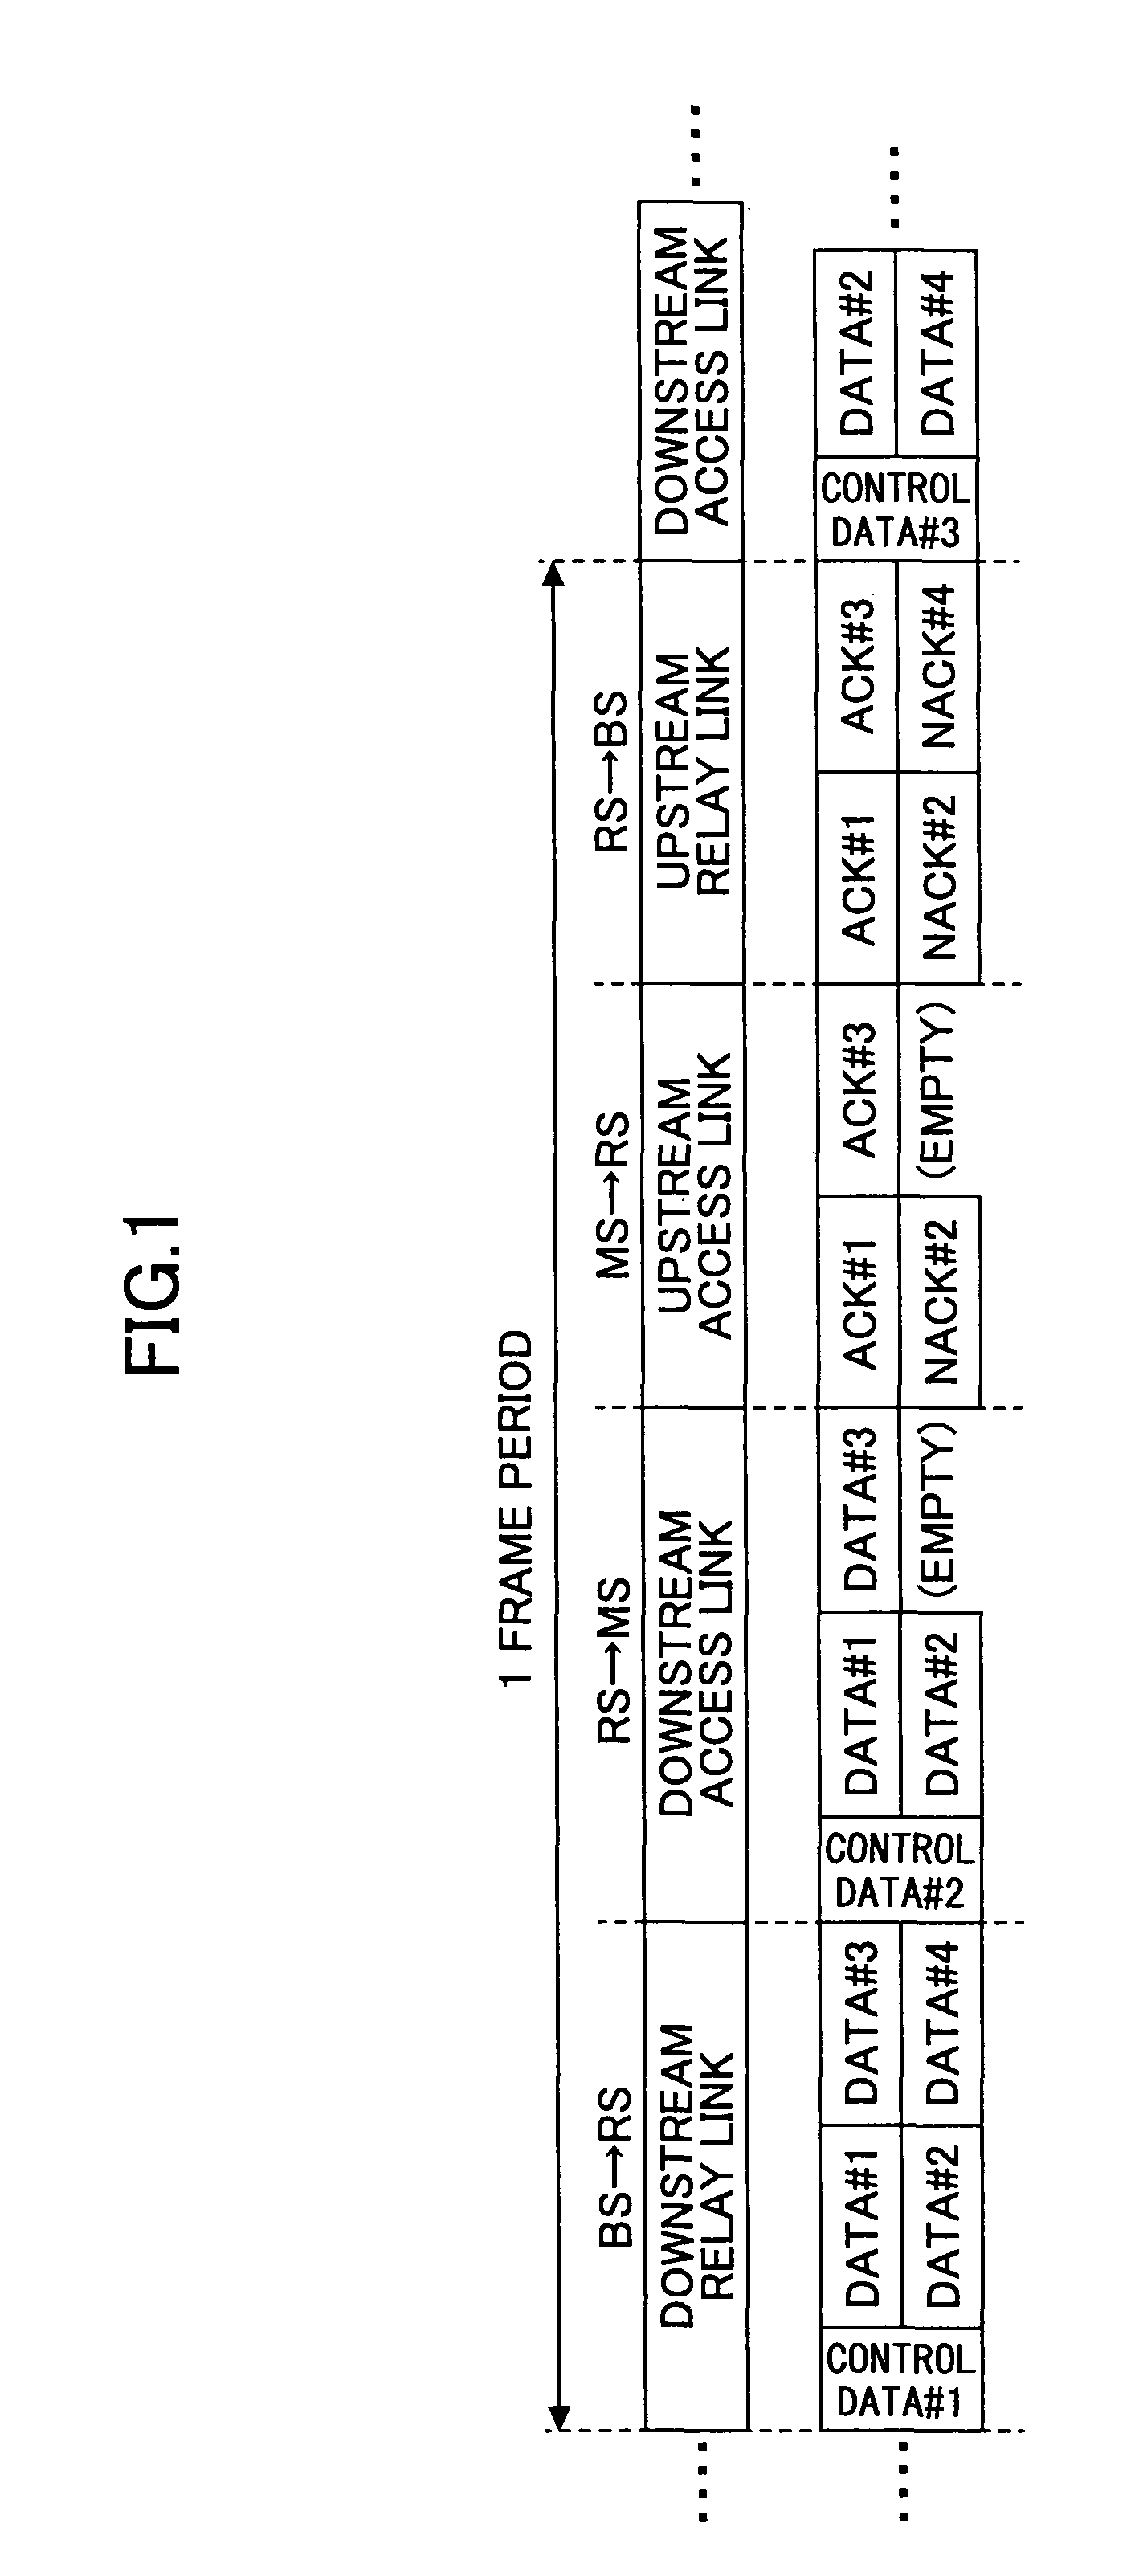 Re-transmission control method and relay station apparatus in a relay communication system